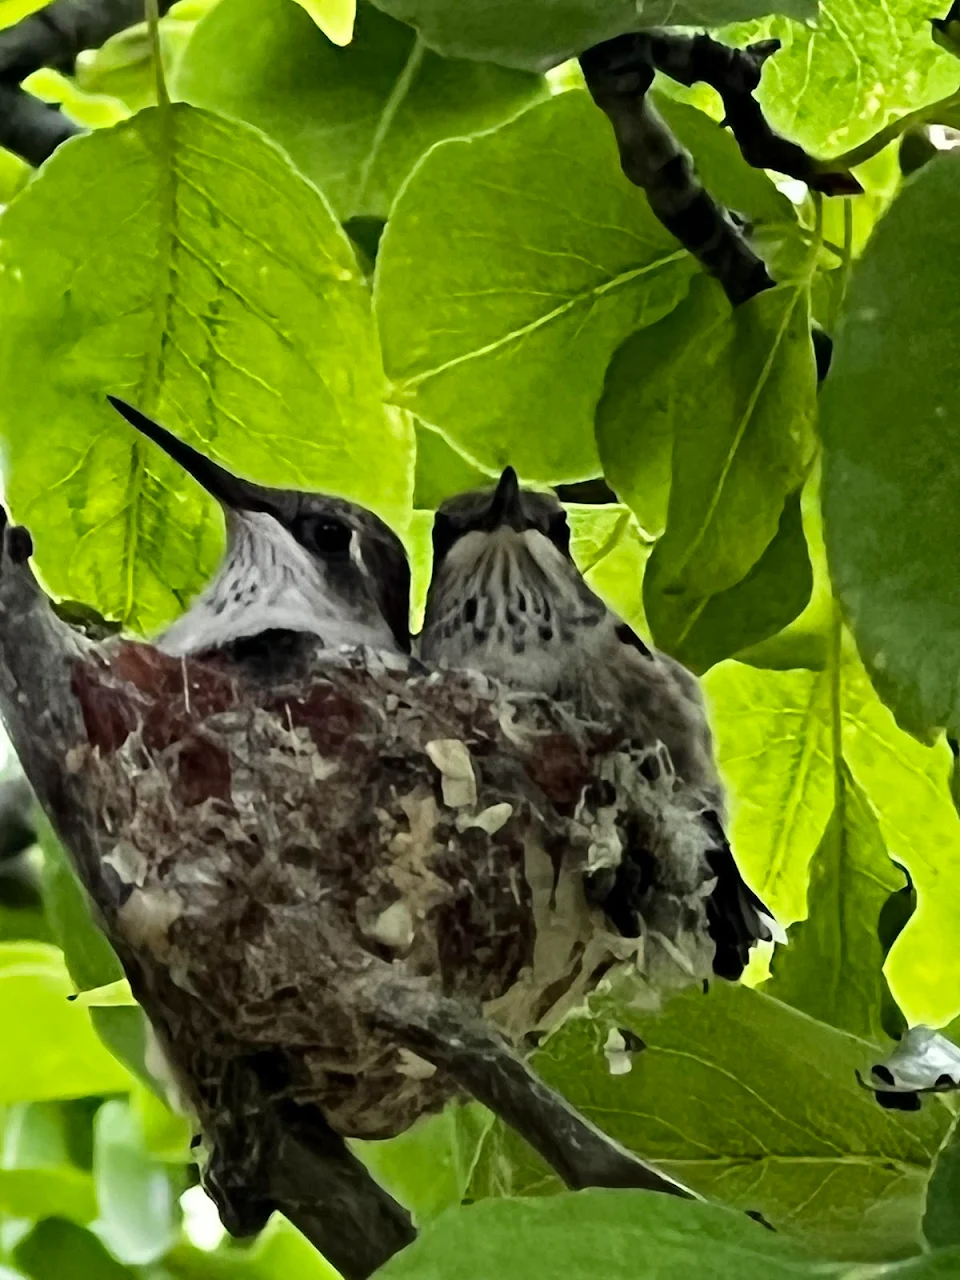 These guys decided to build a nest right outside my window.